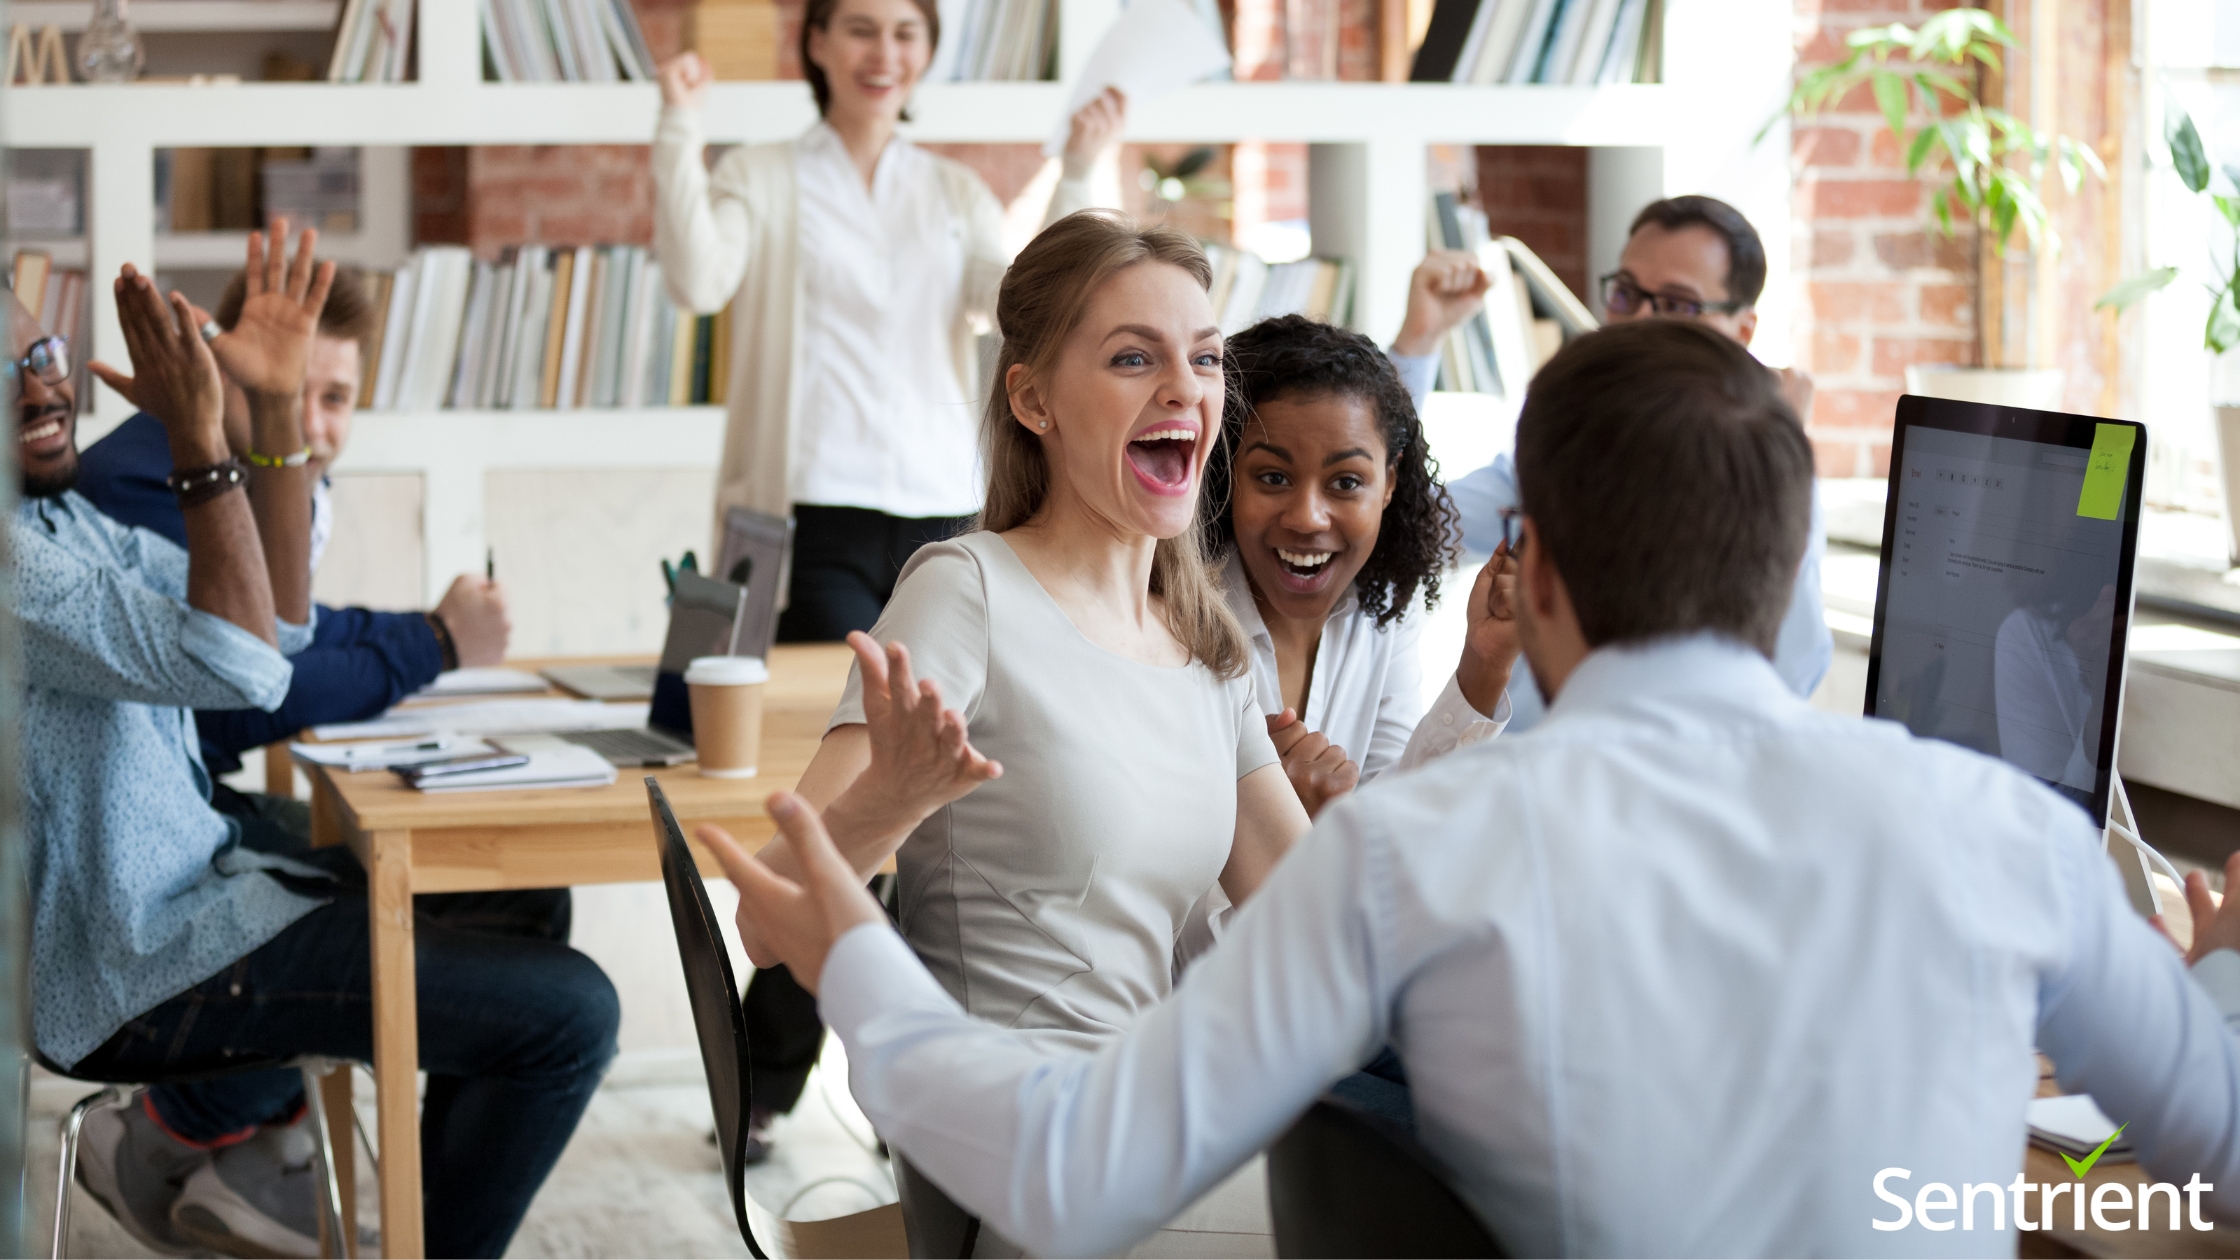 Employee Engagement During Onboarding